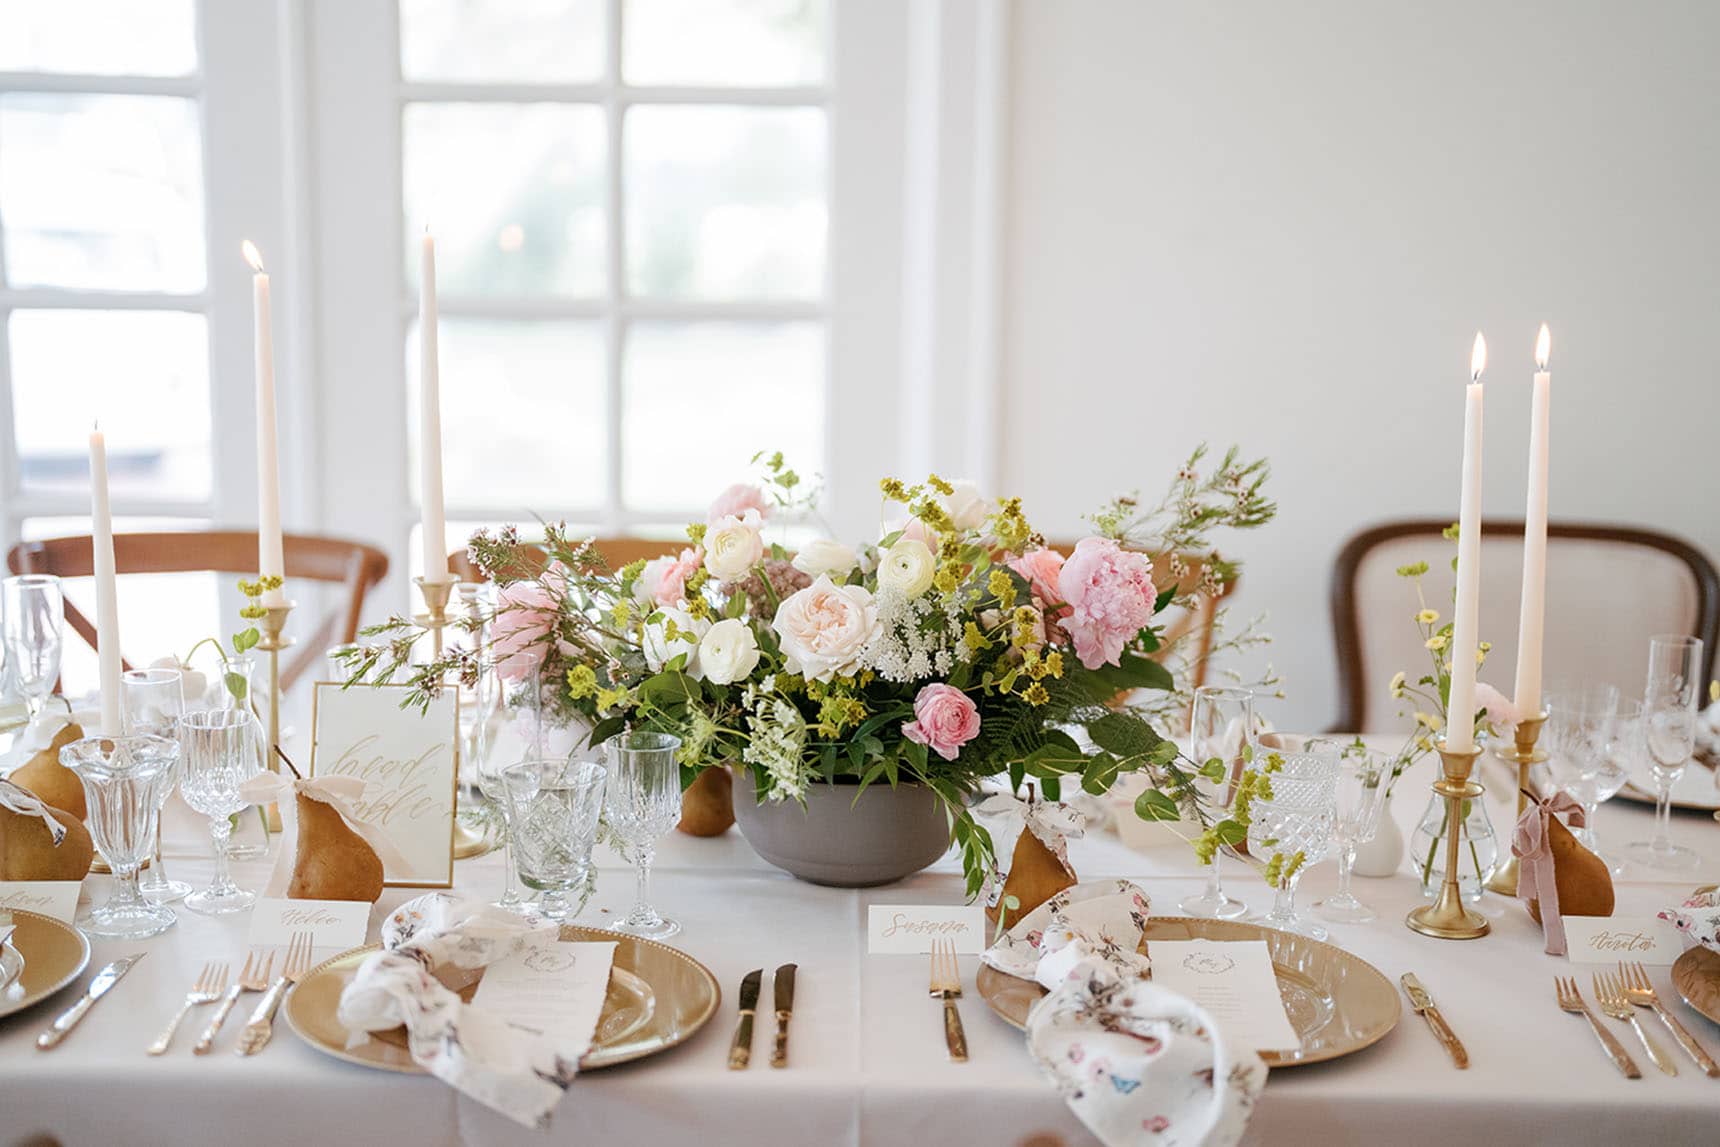 Tablesetting at The Woodbine Mansion